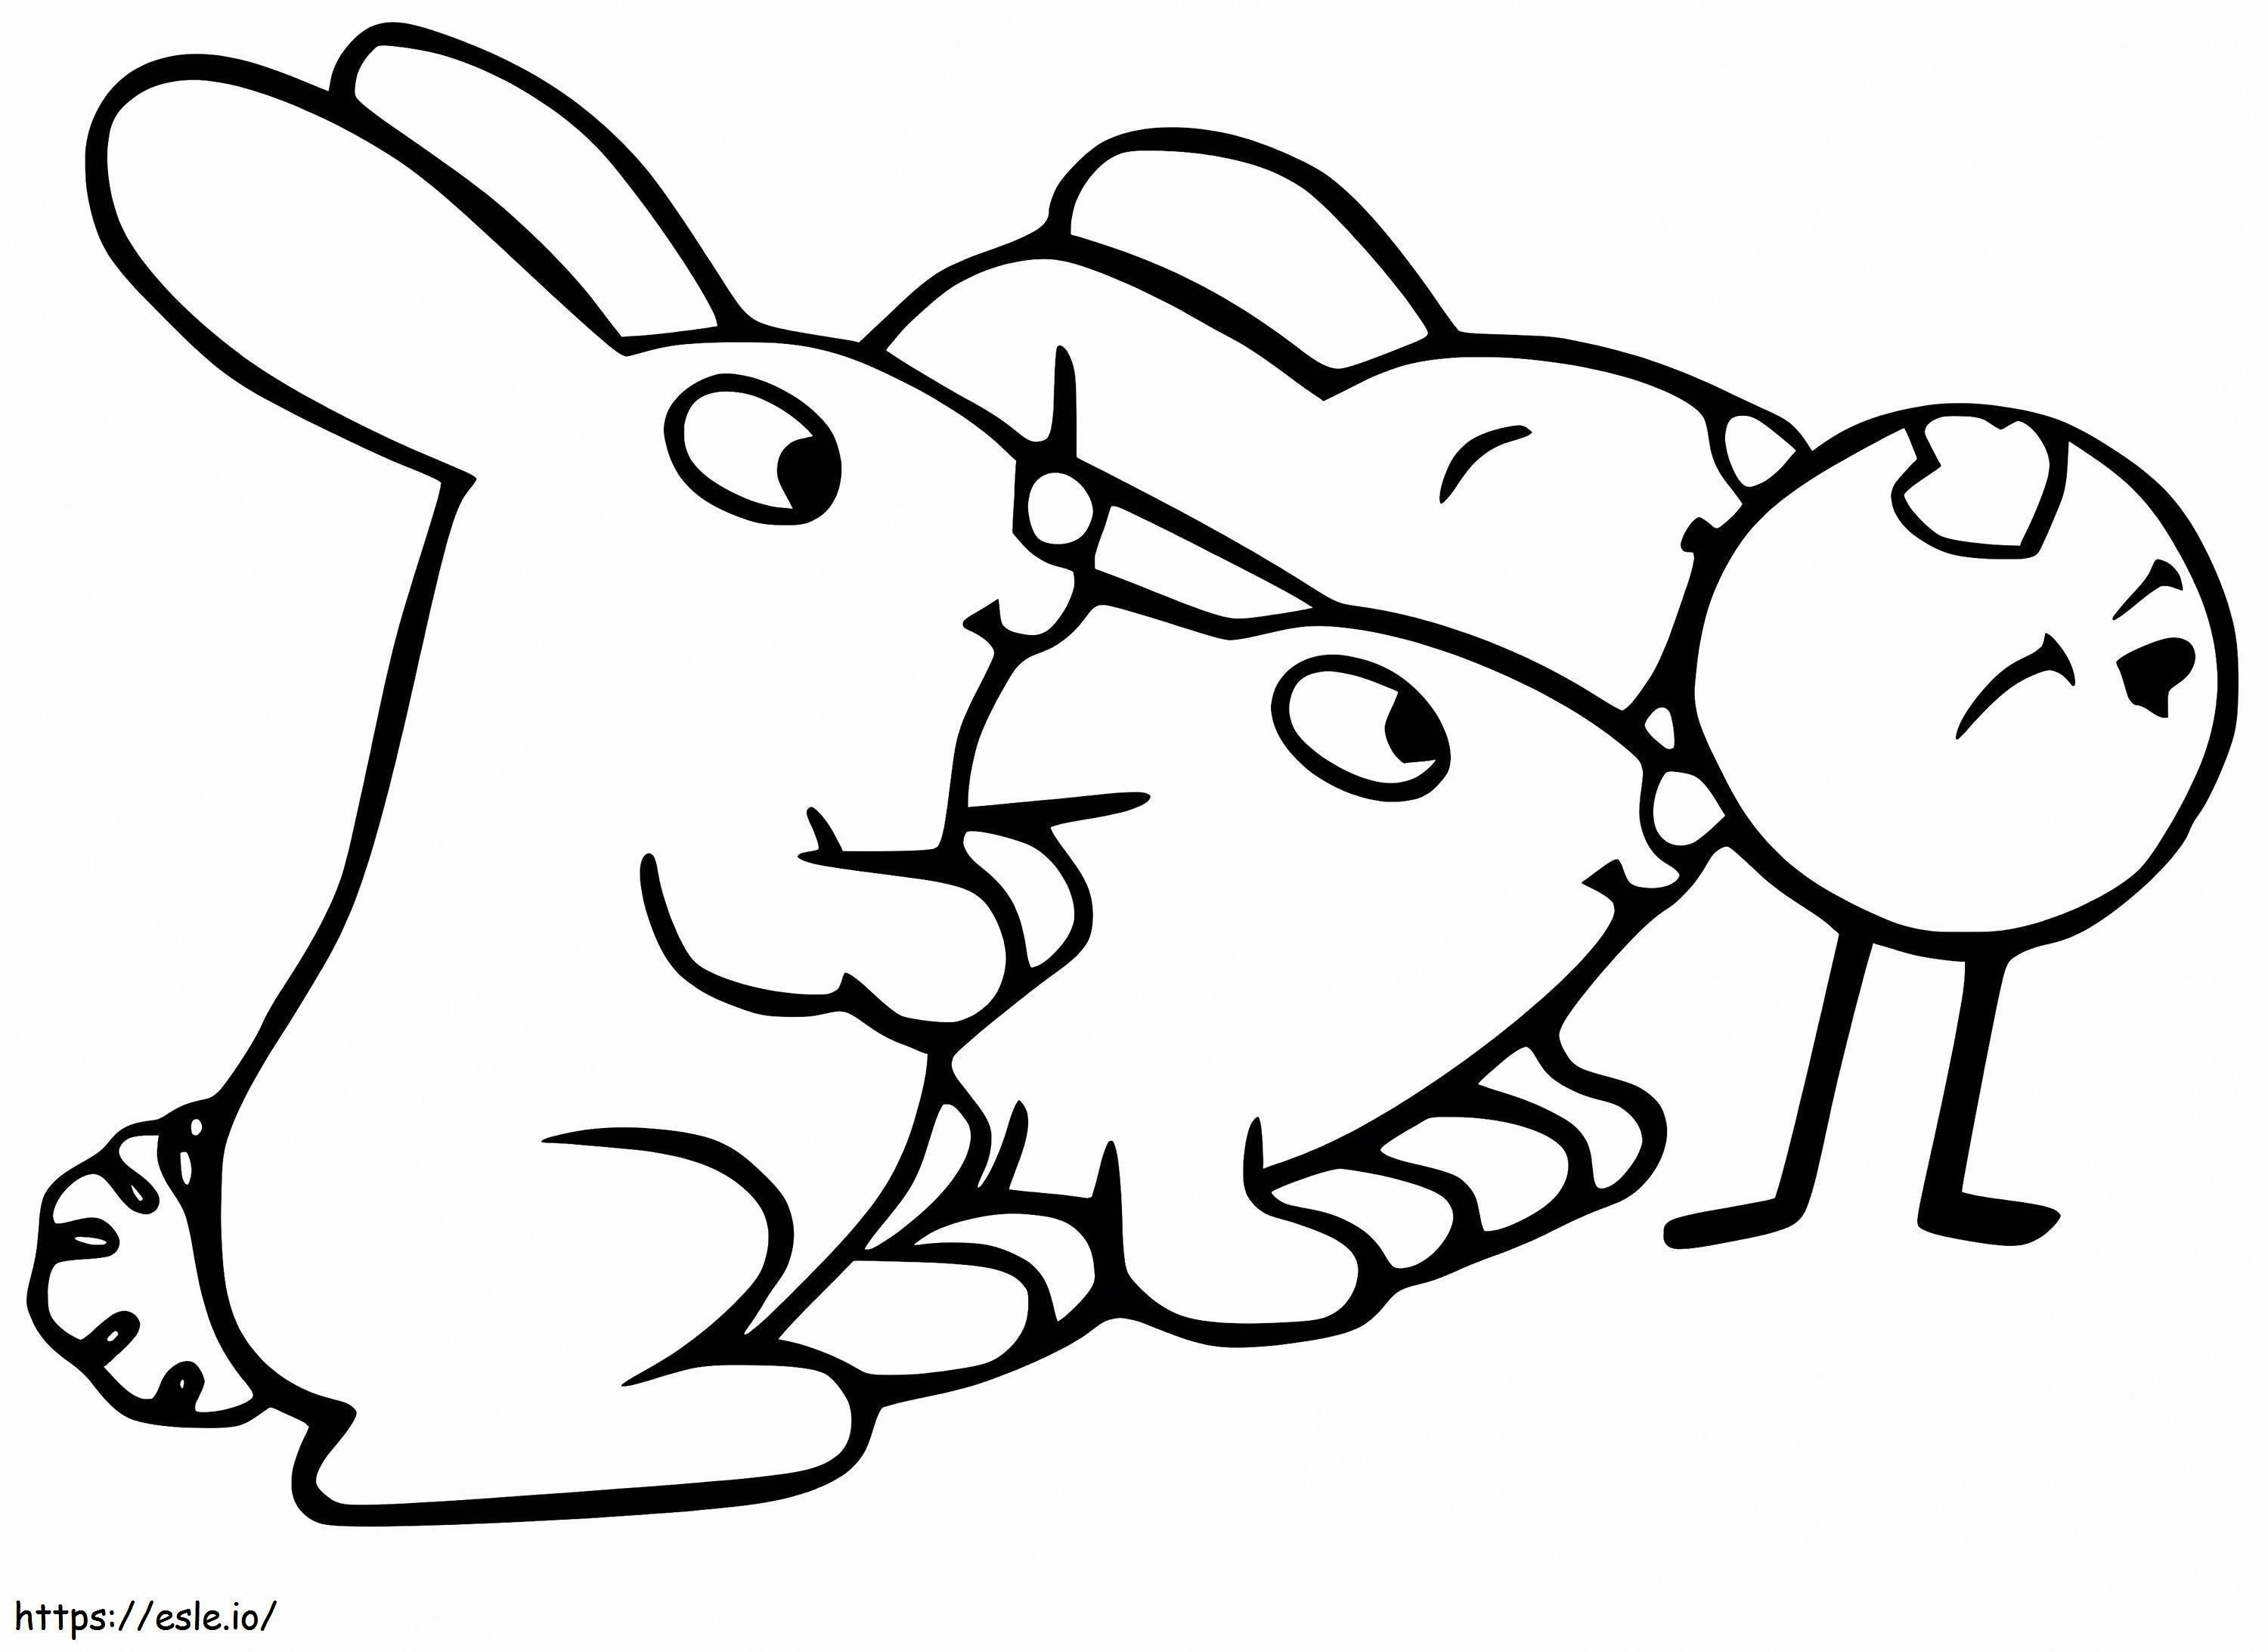 Peep And Rabbits coloring page